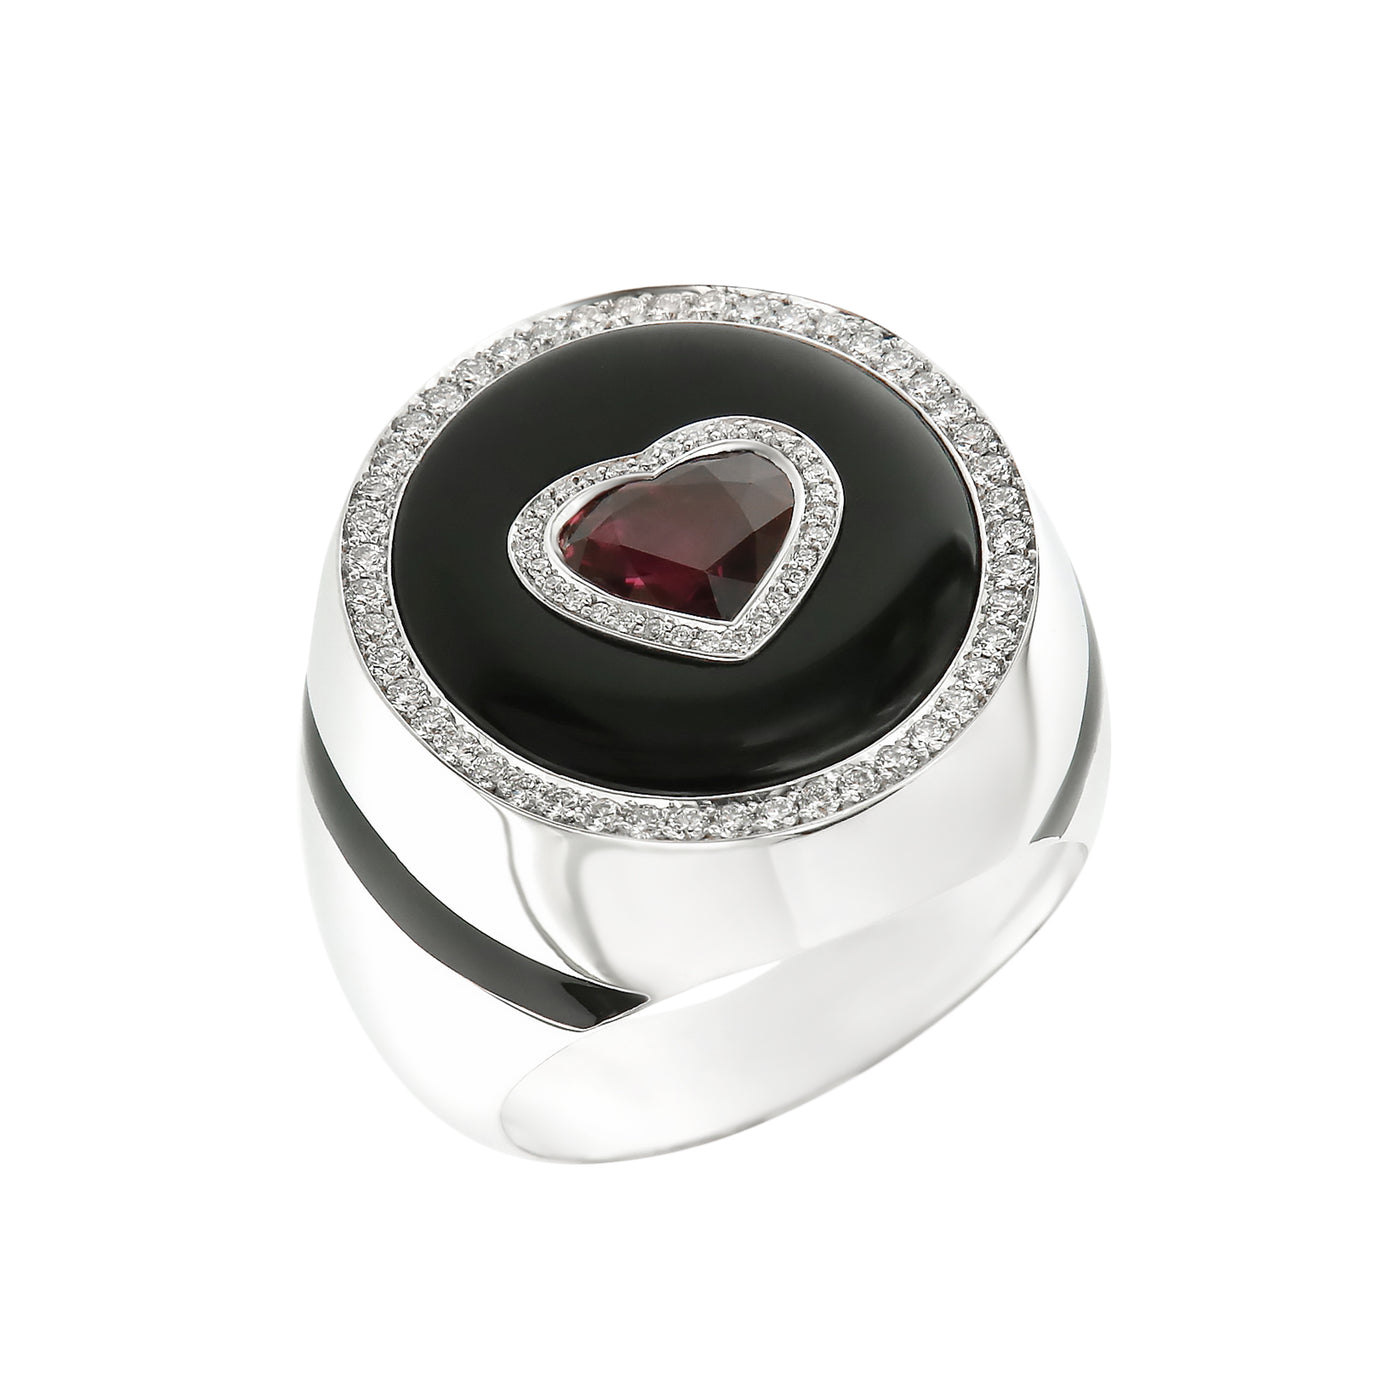 Ruby Heart Ring with White  Diamonds and Black Enamel